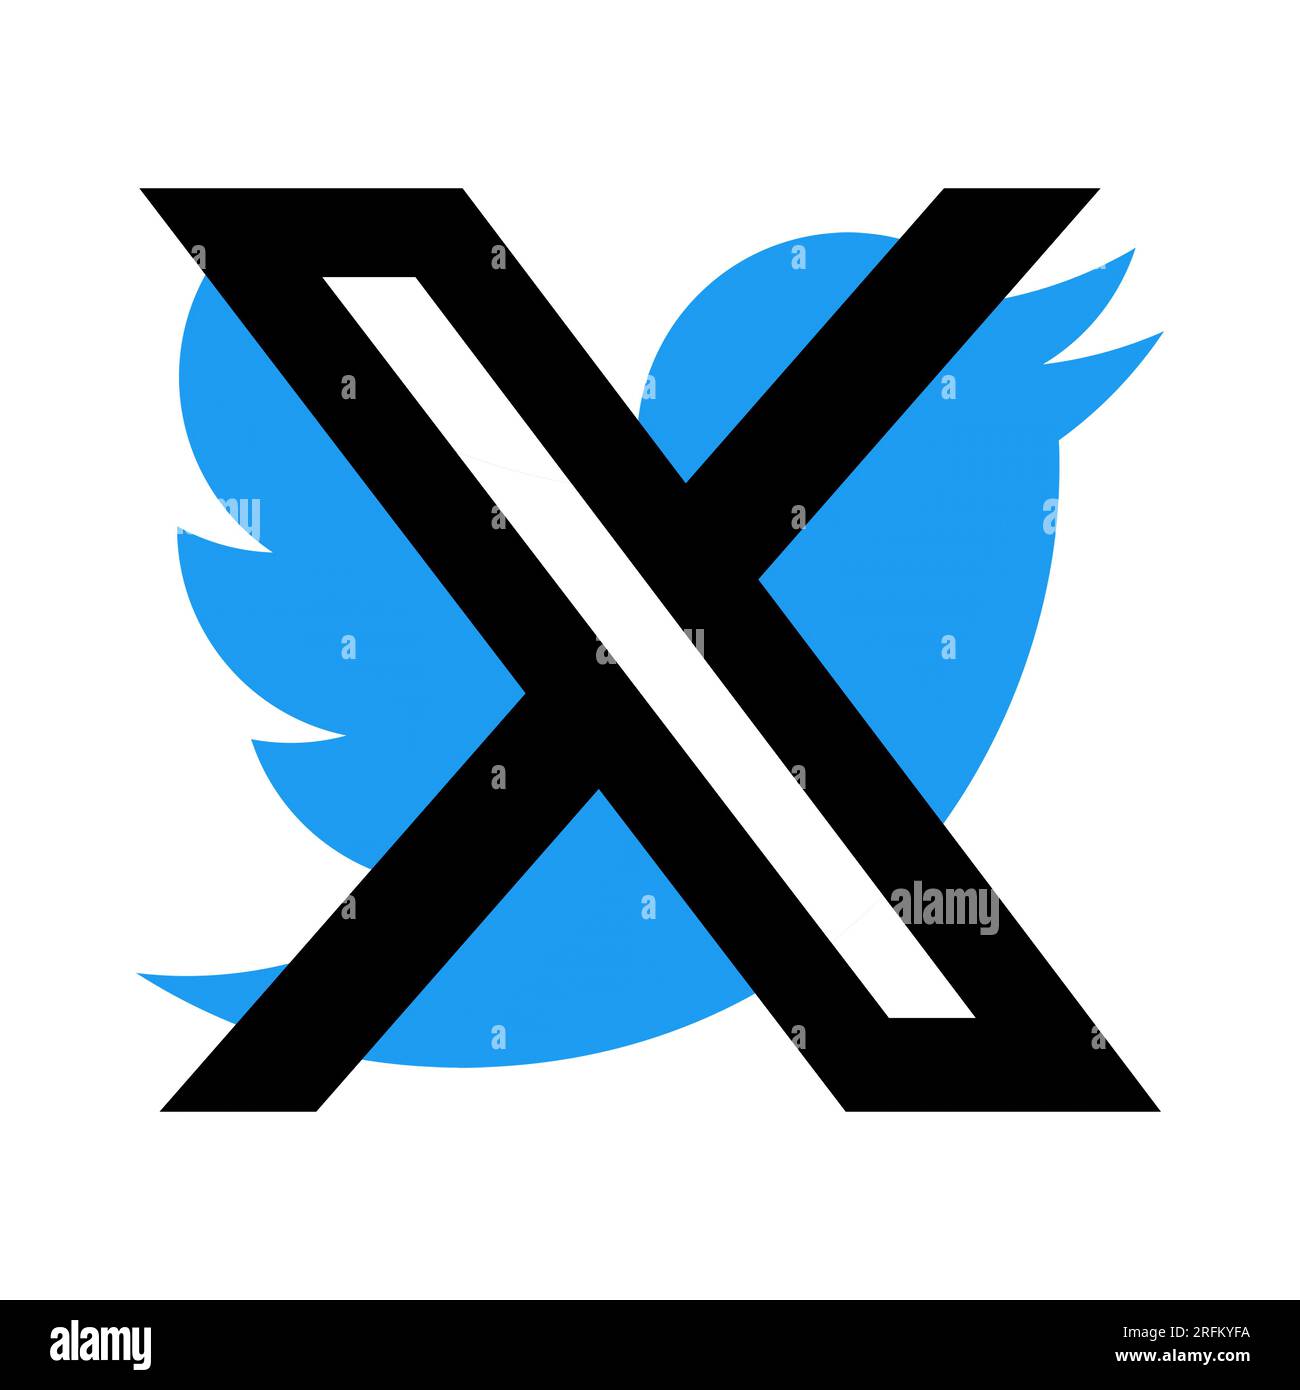 July 23, 2023 - New Twitter logo in the shape of the letter X, which crosses out the well-known old Twitter logo with a blue bird. San Francisco, USA Stock Photo